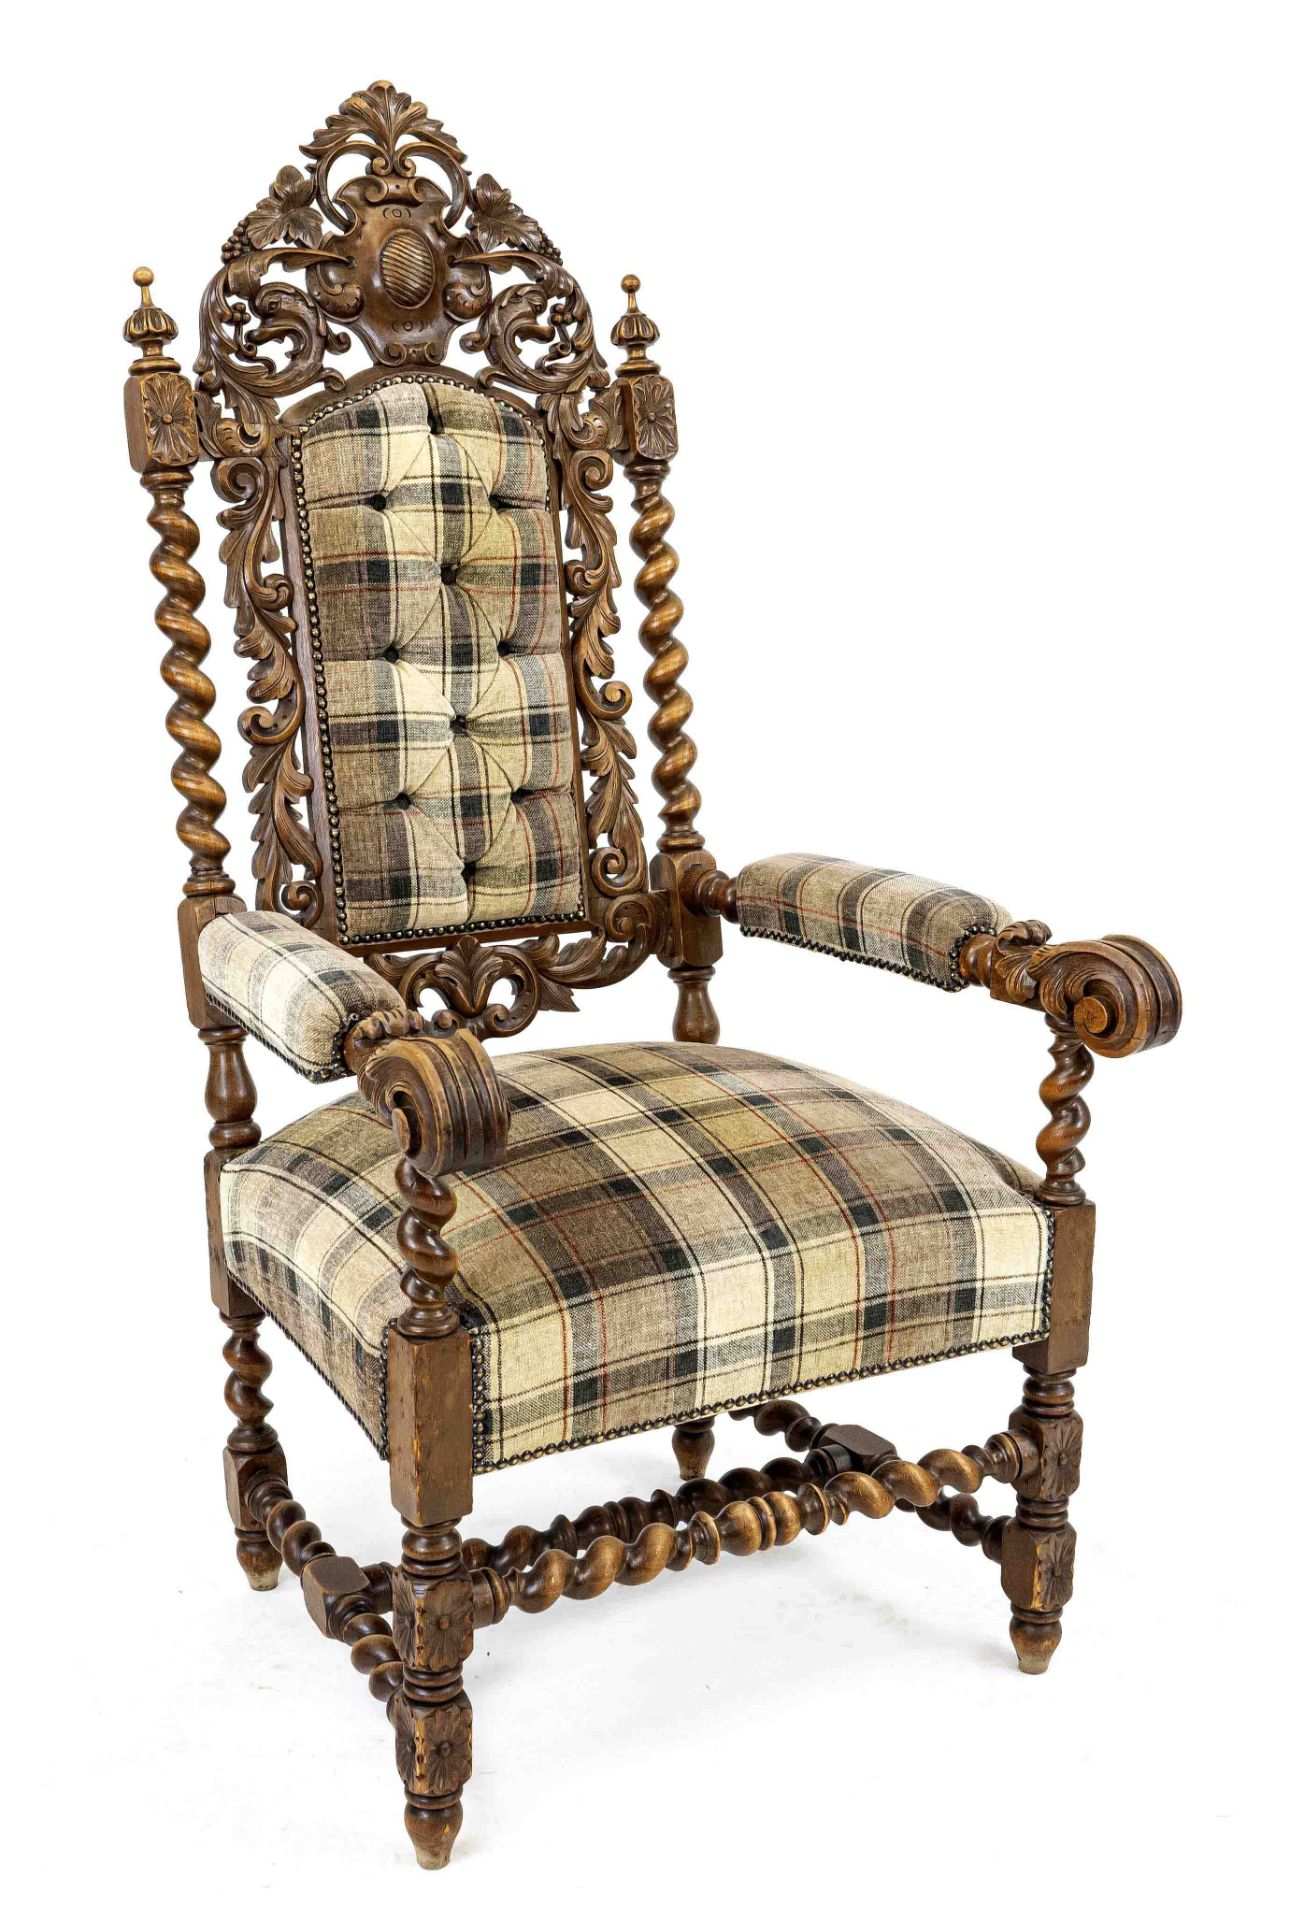 Stately armchair from around 1880, beech wood stained walnut, carvings typical of the period, 135